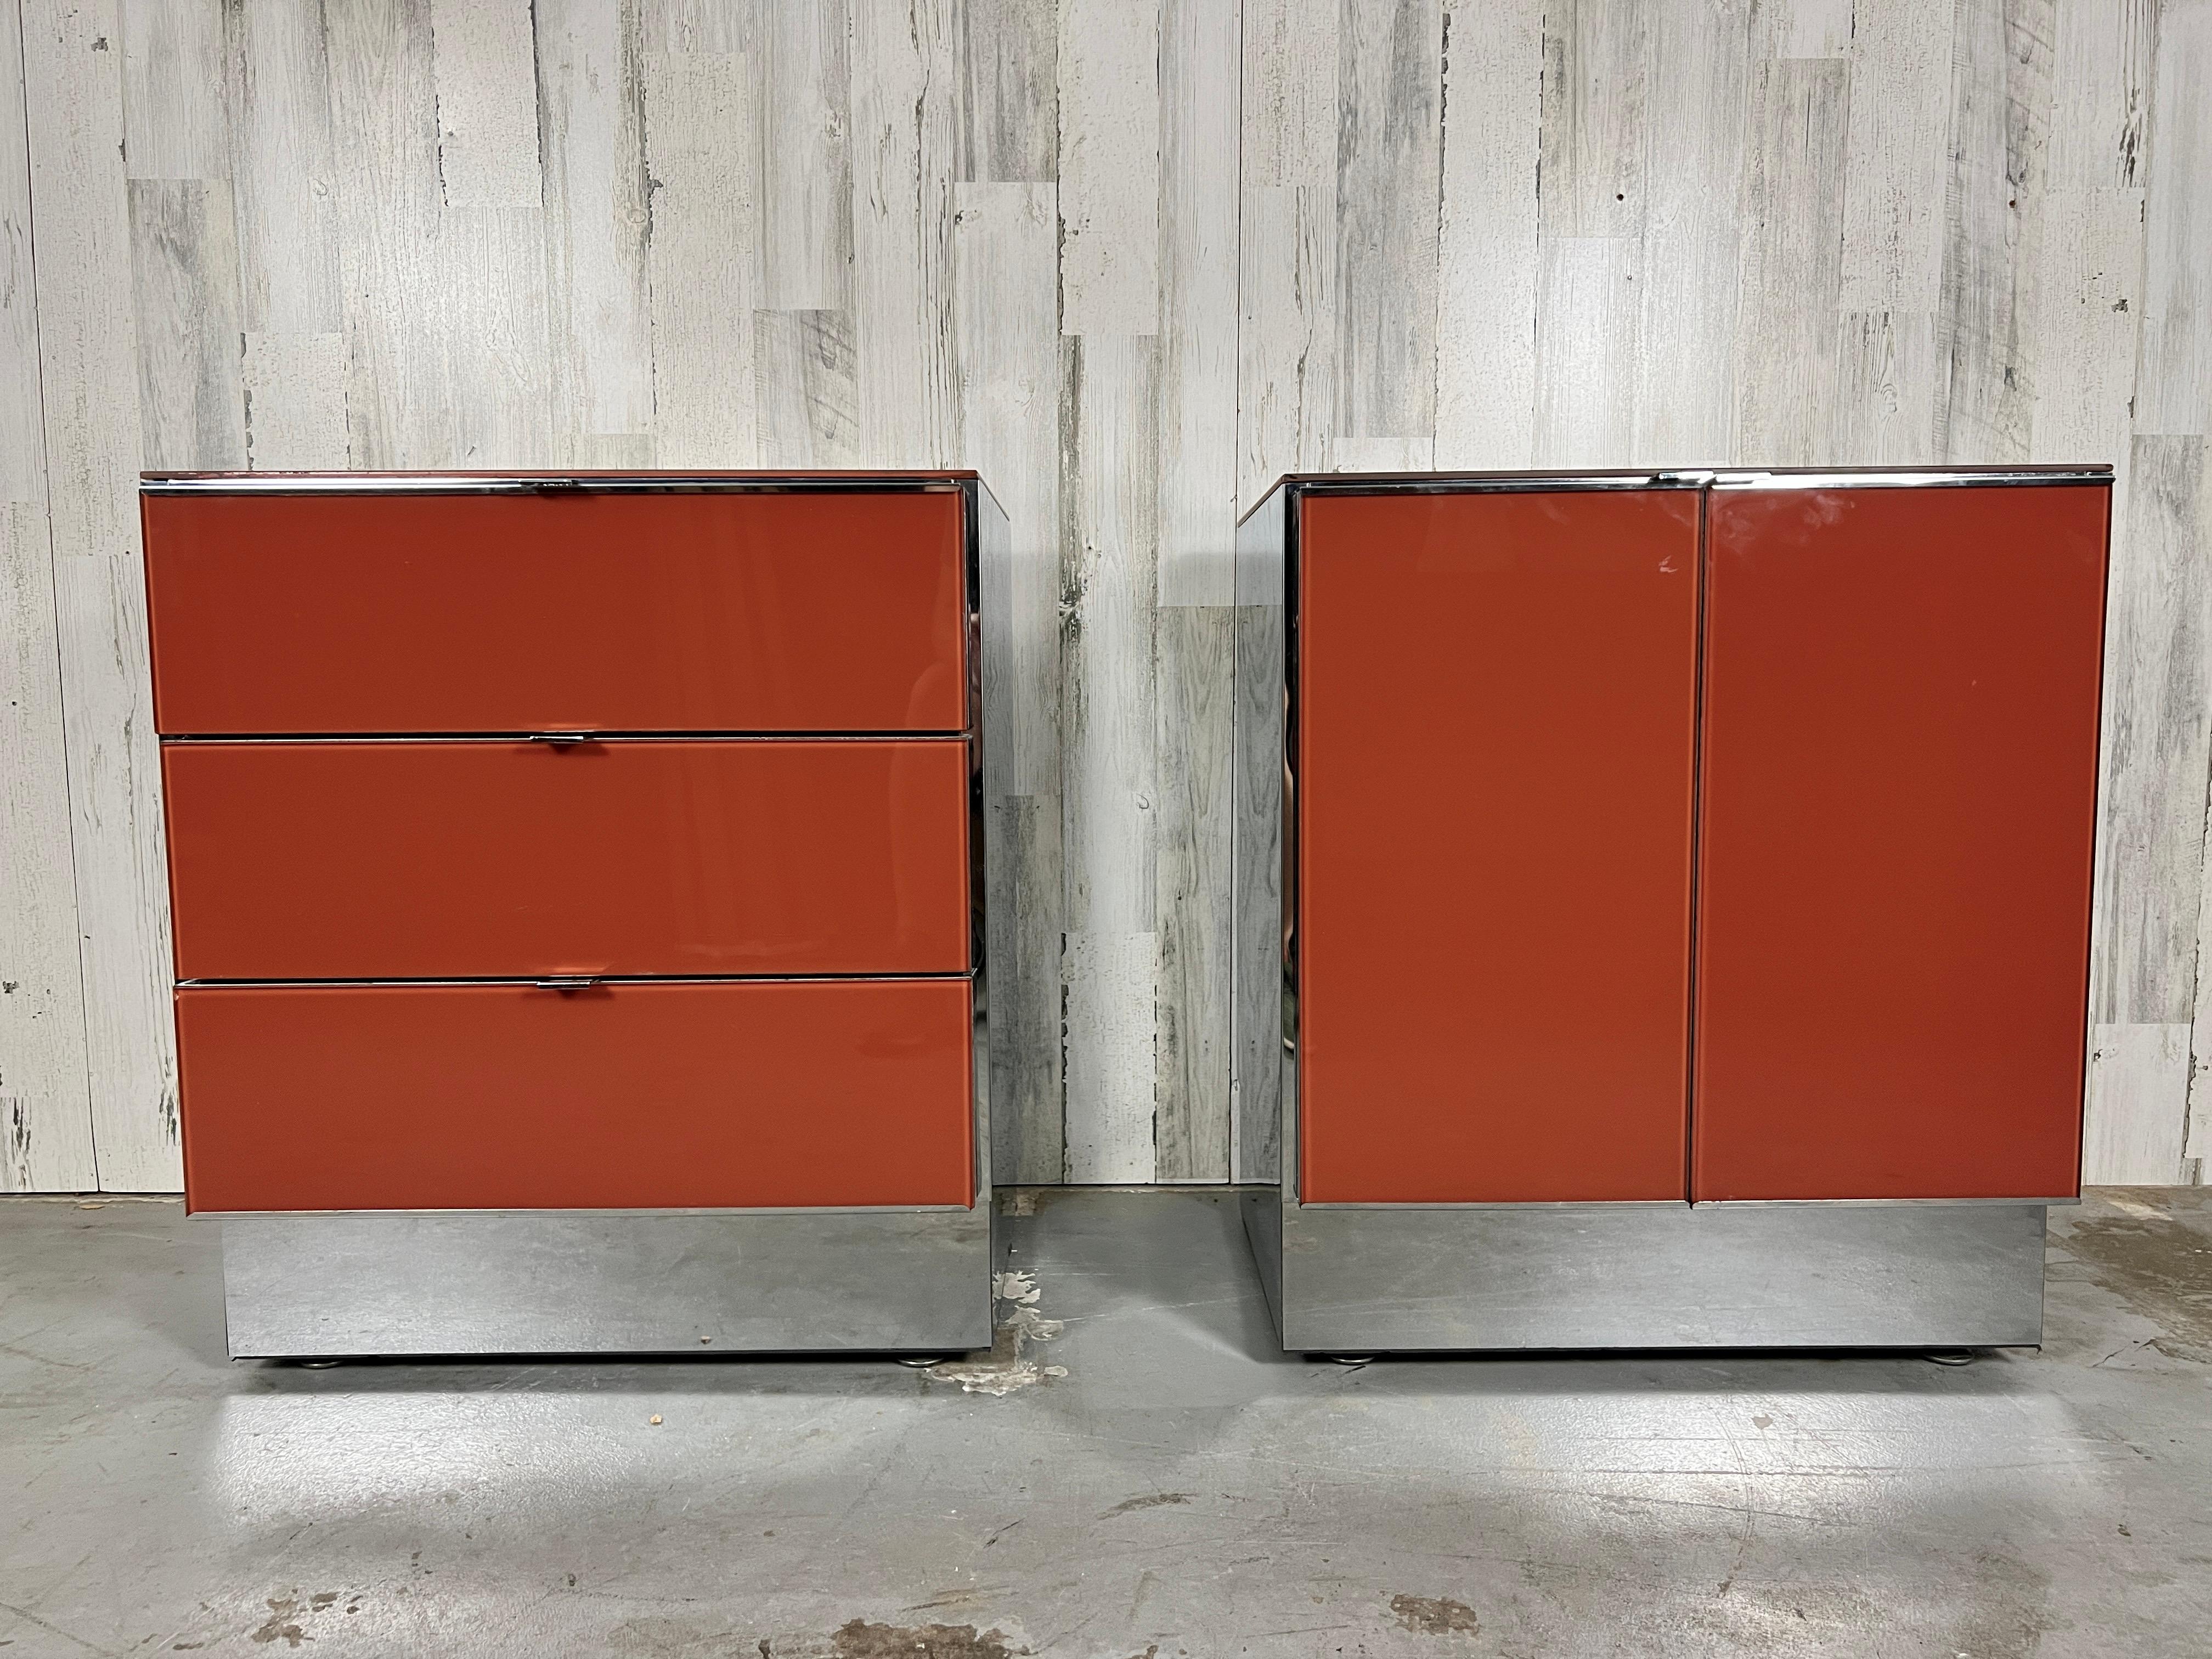 Ello Lacquered glass and chrome nightstands. Burnt Orange lacquered glass with shiny chrome, sides, trim, and handles. One of the nightstands has drawers and the other has doors.